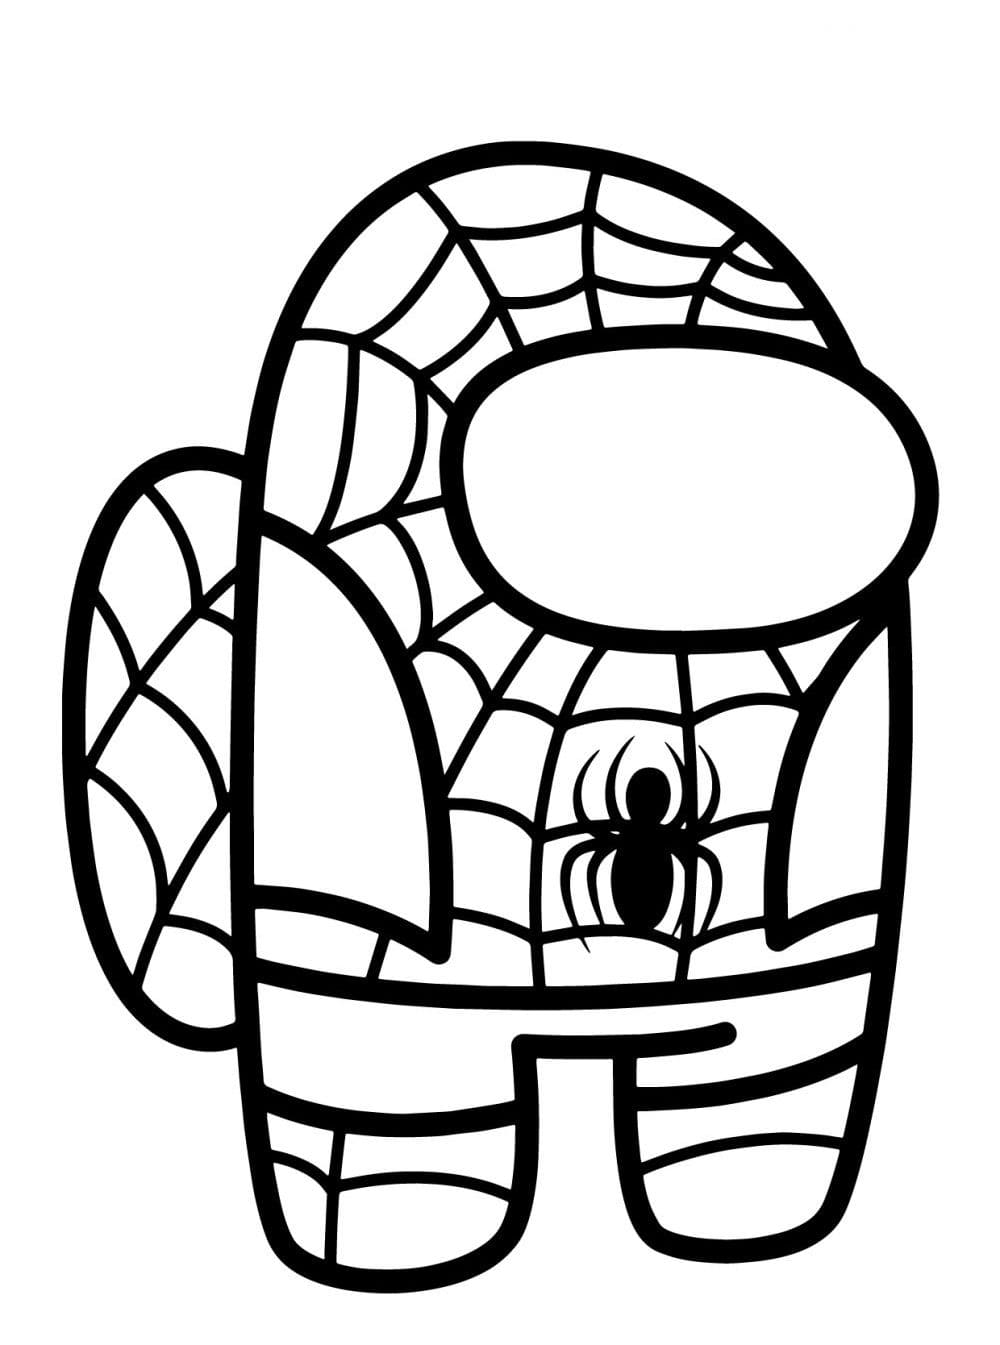 Spiderman Among Us coloring book to print and online